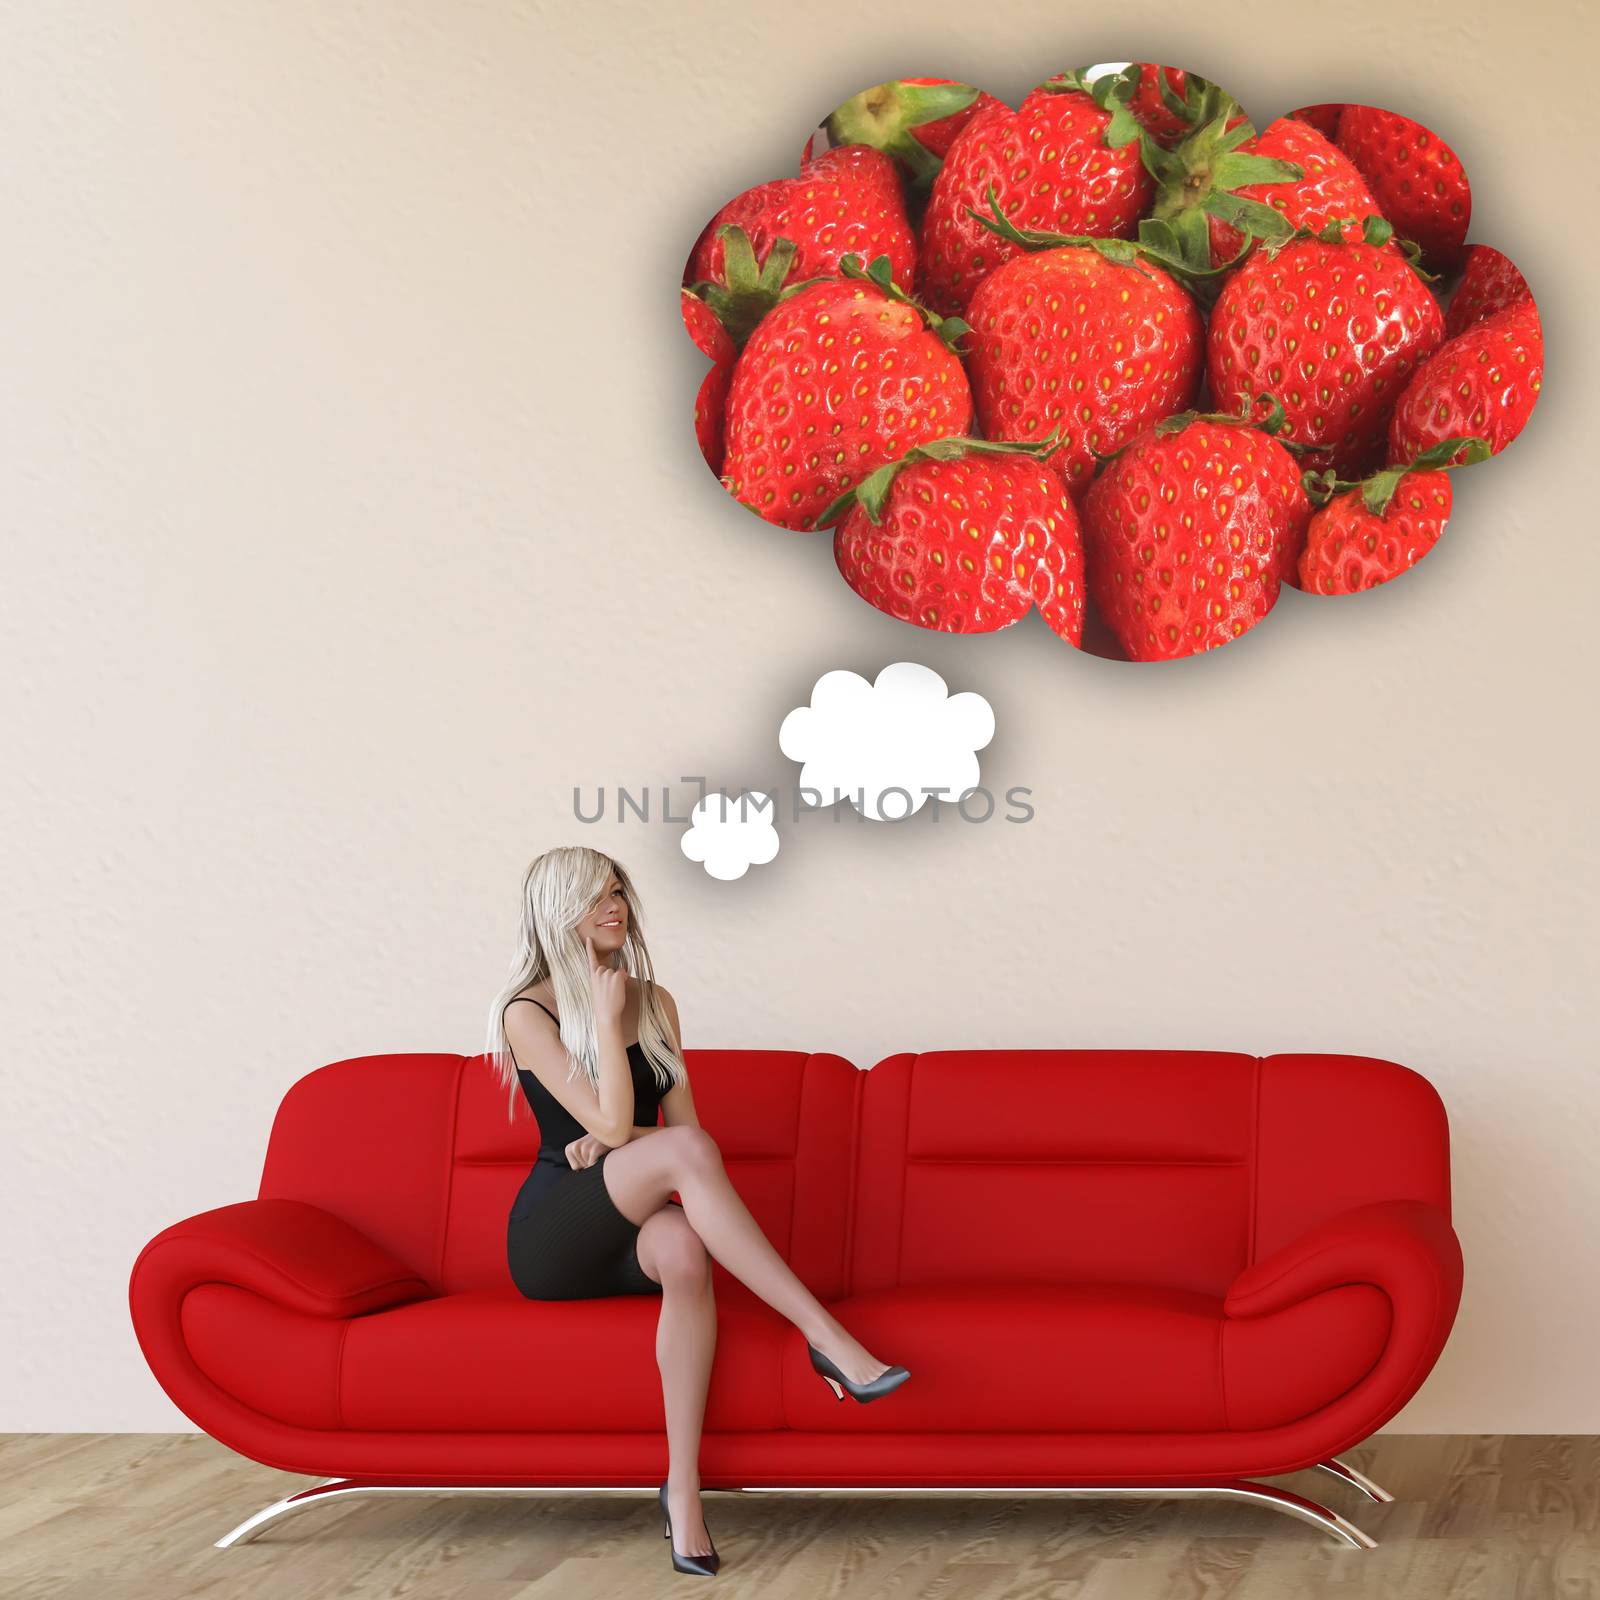 Woman Craving Strawberries and Thinking About Eating Food